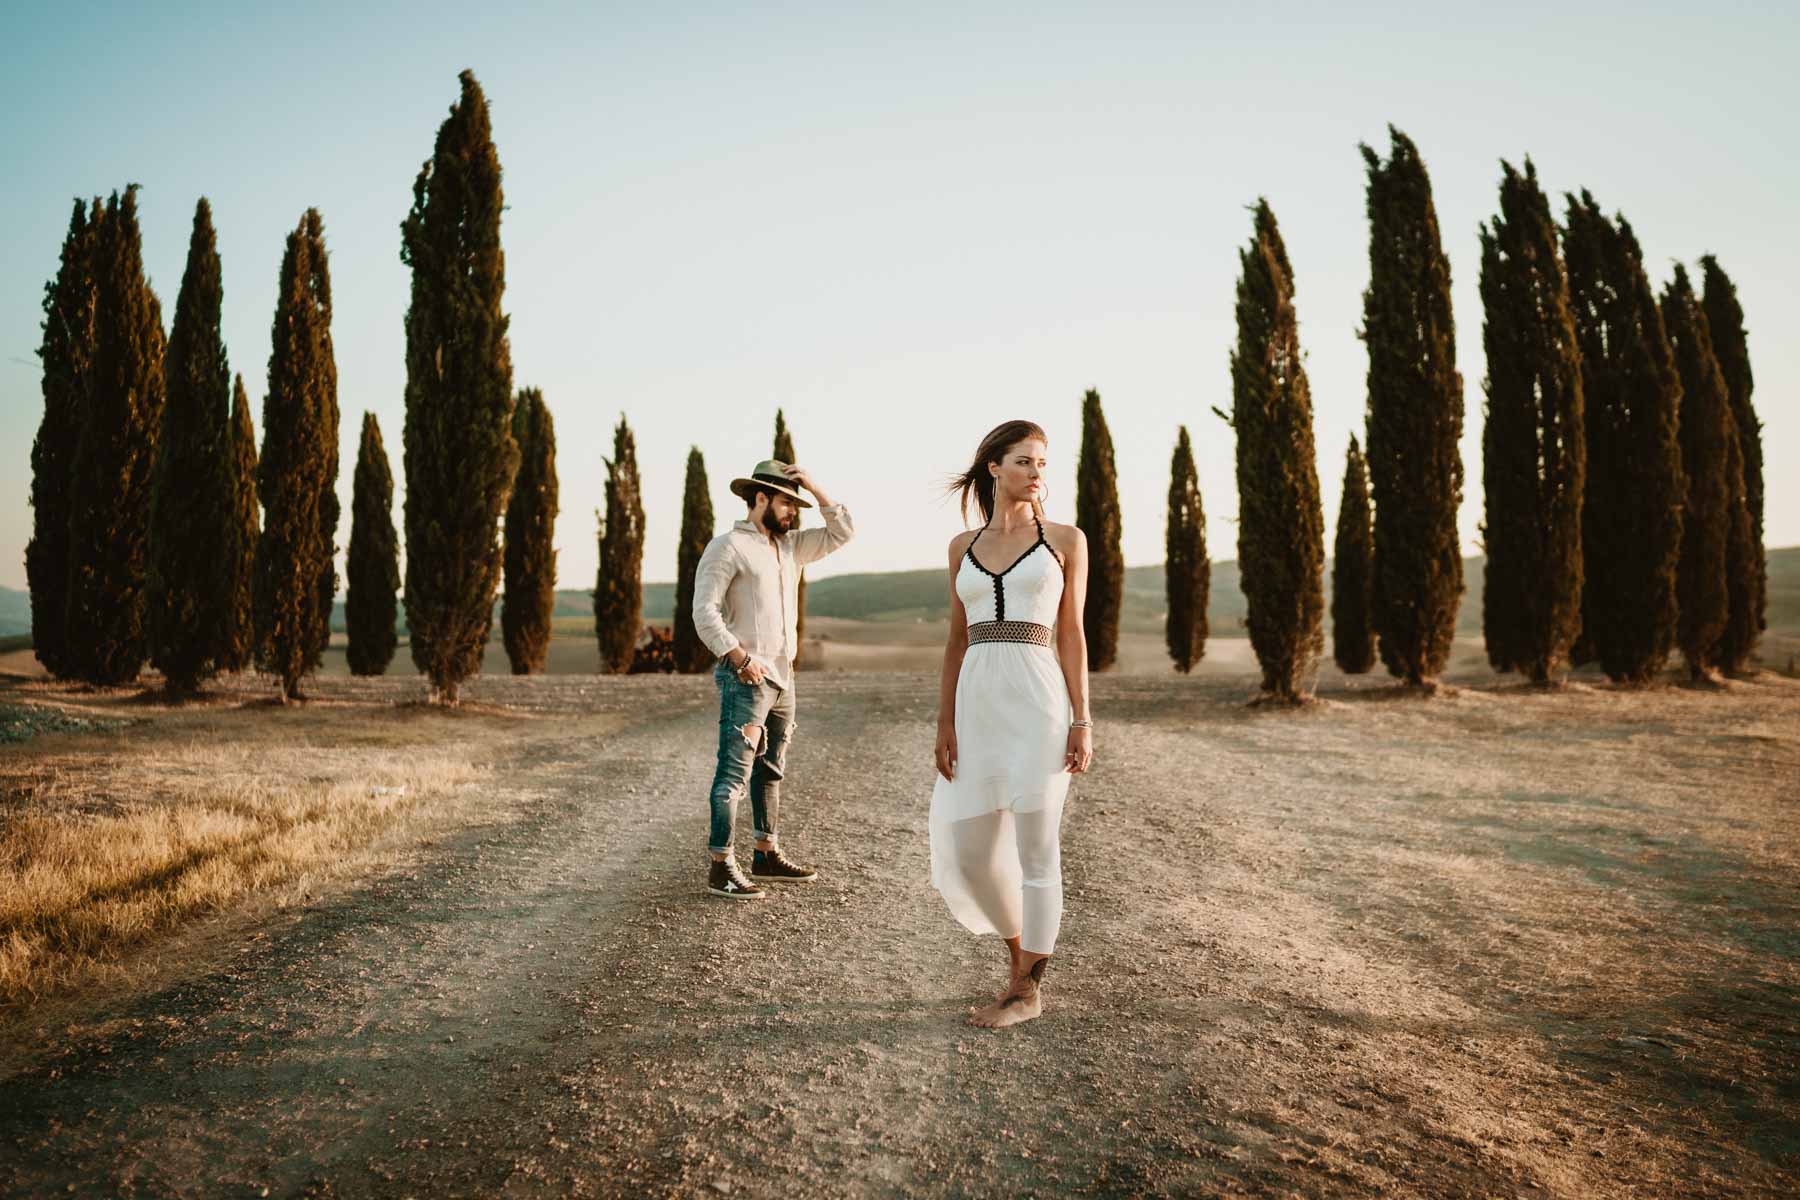 PREWEDDING IN VAL D’ORCIA – TUSCANY